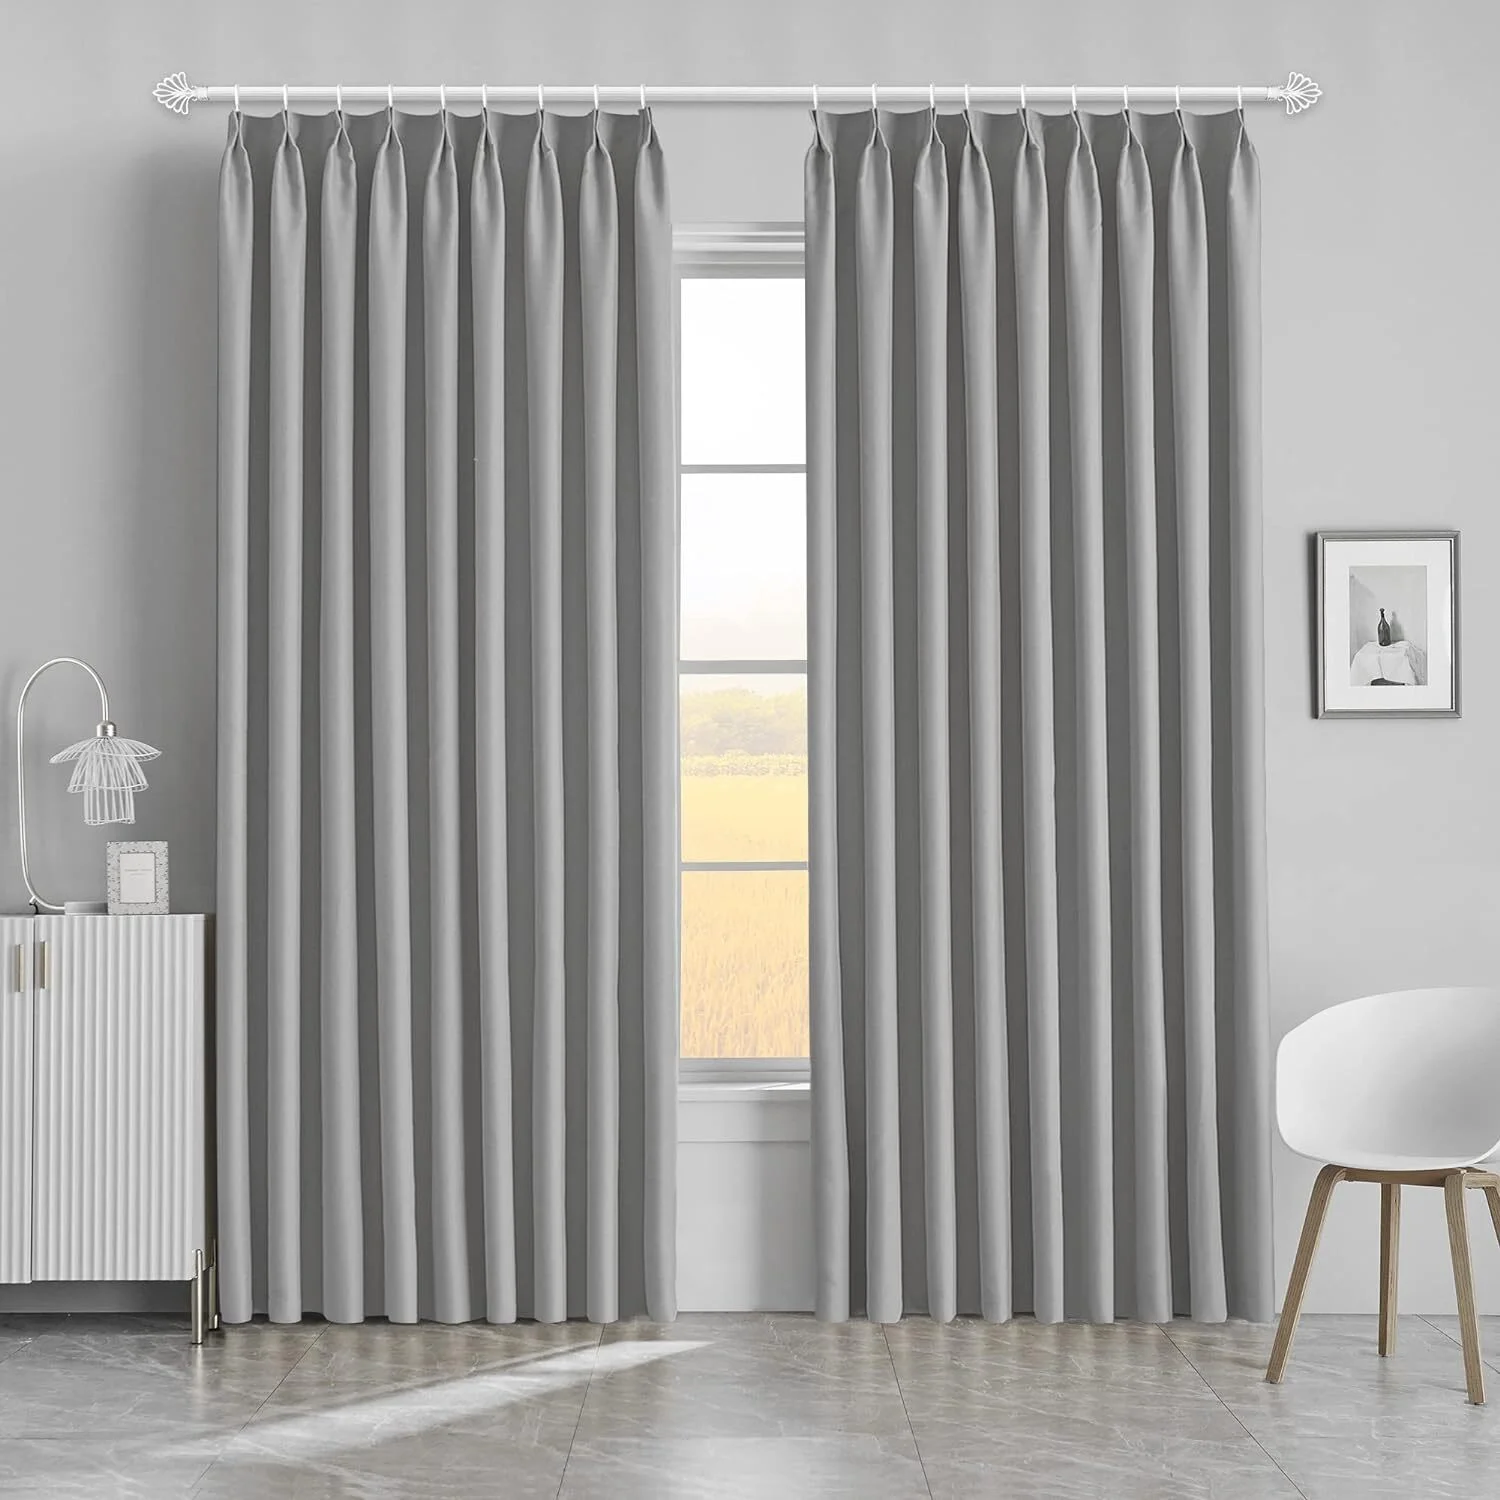 Blackout curtains in a dark gray shade